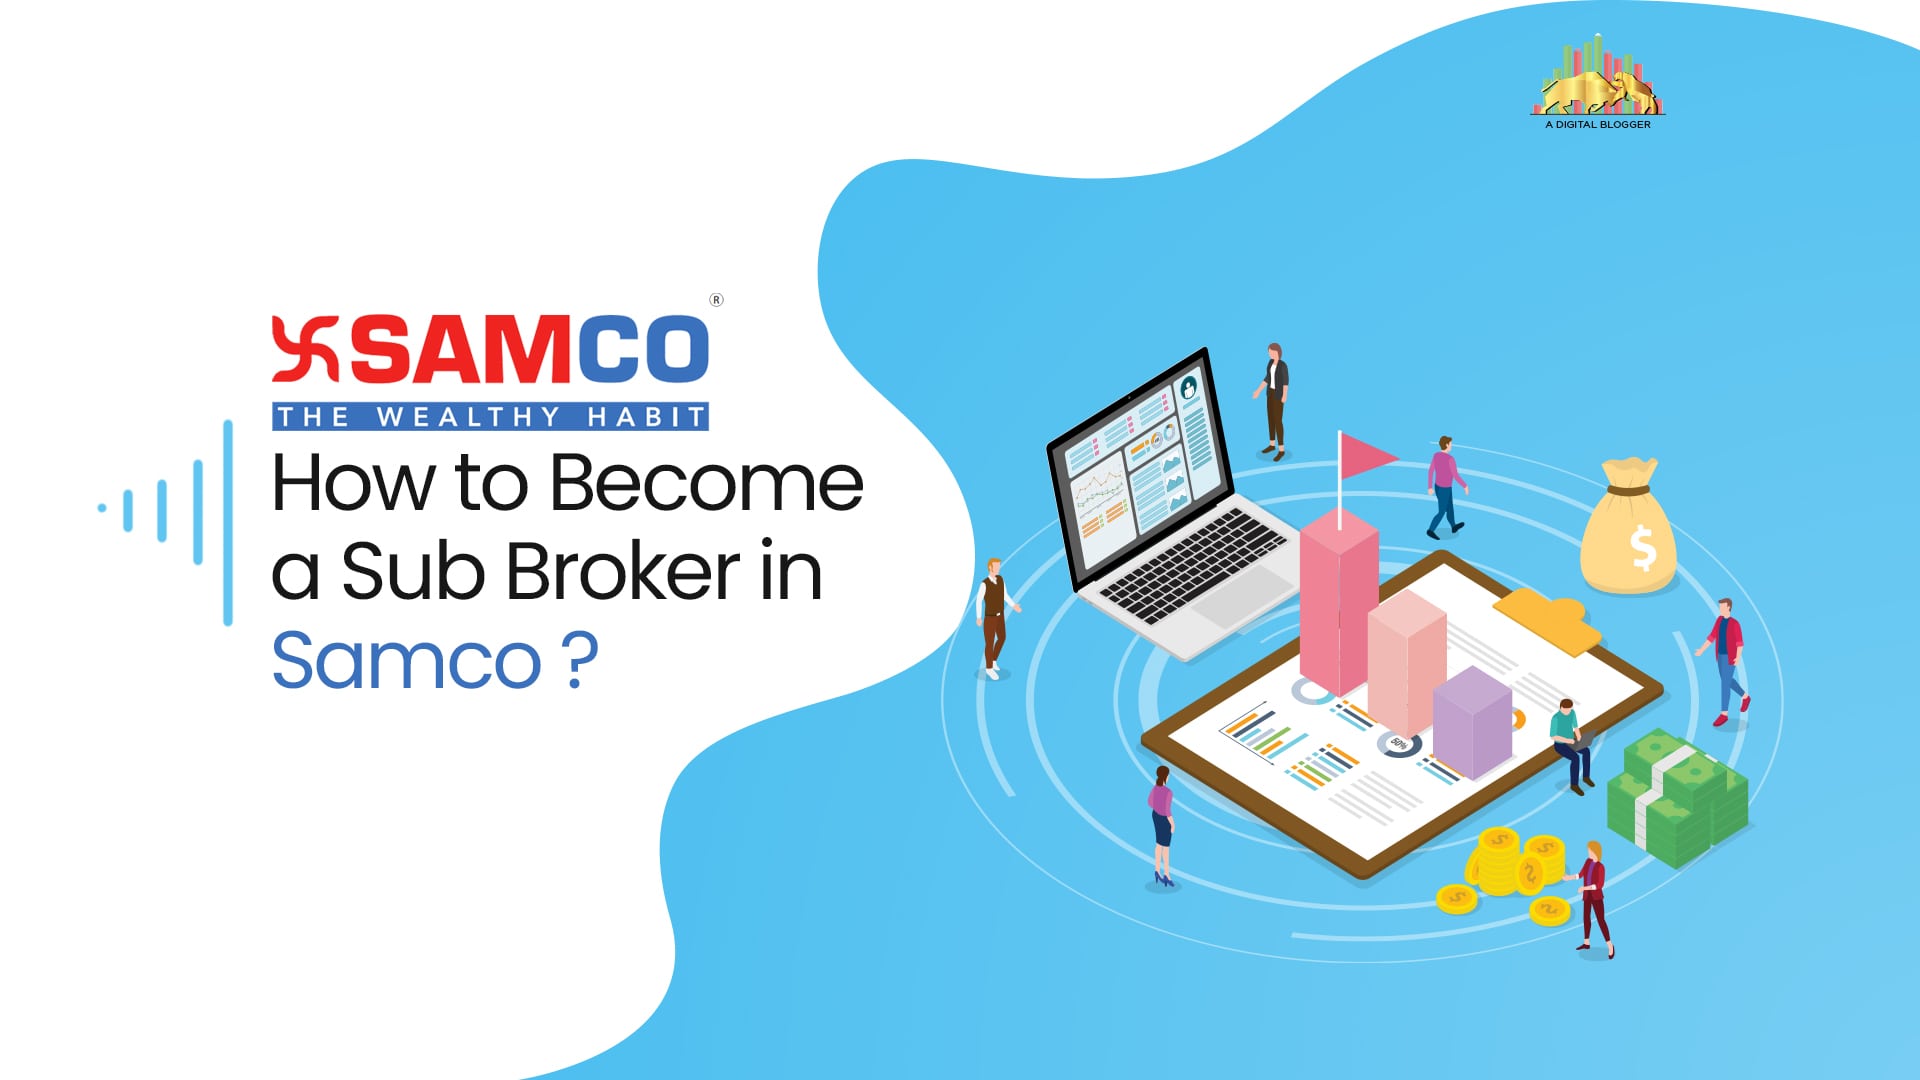 How to Become a Sub Broker in Samco?